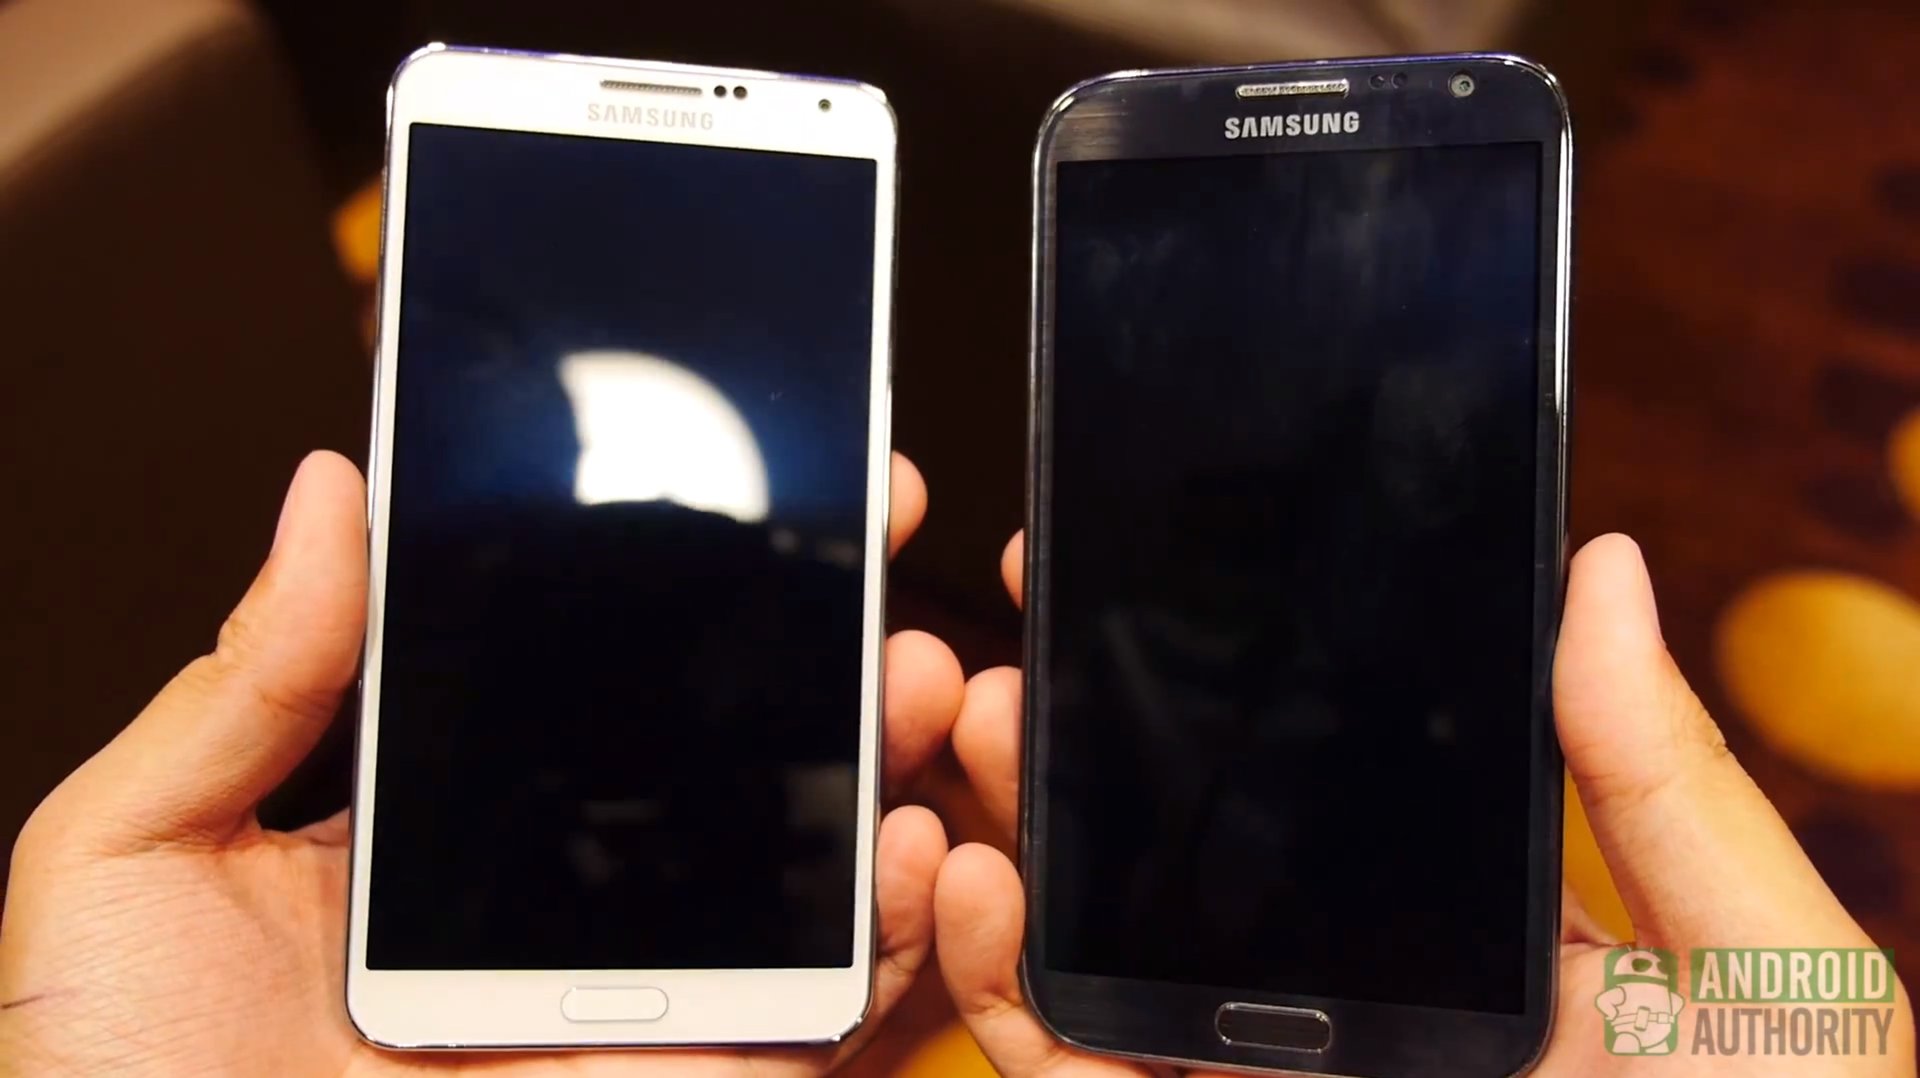 note2-vs-note3-front